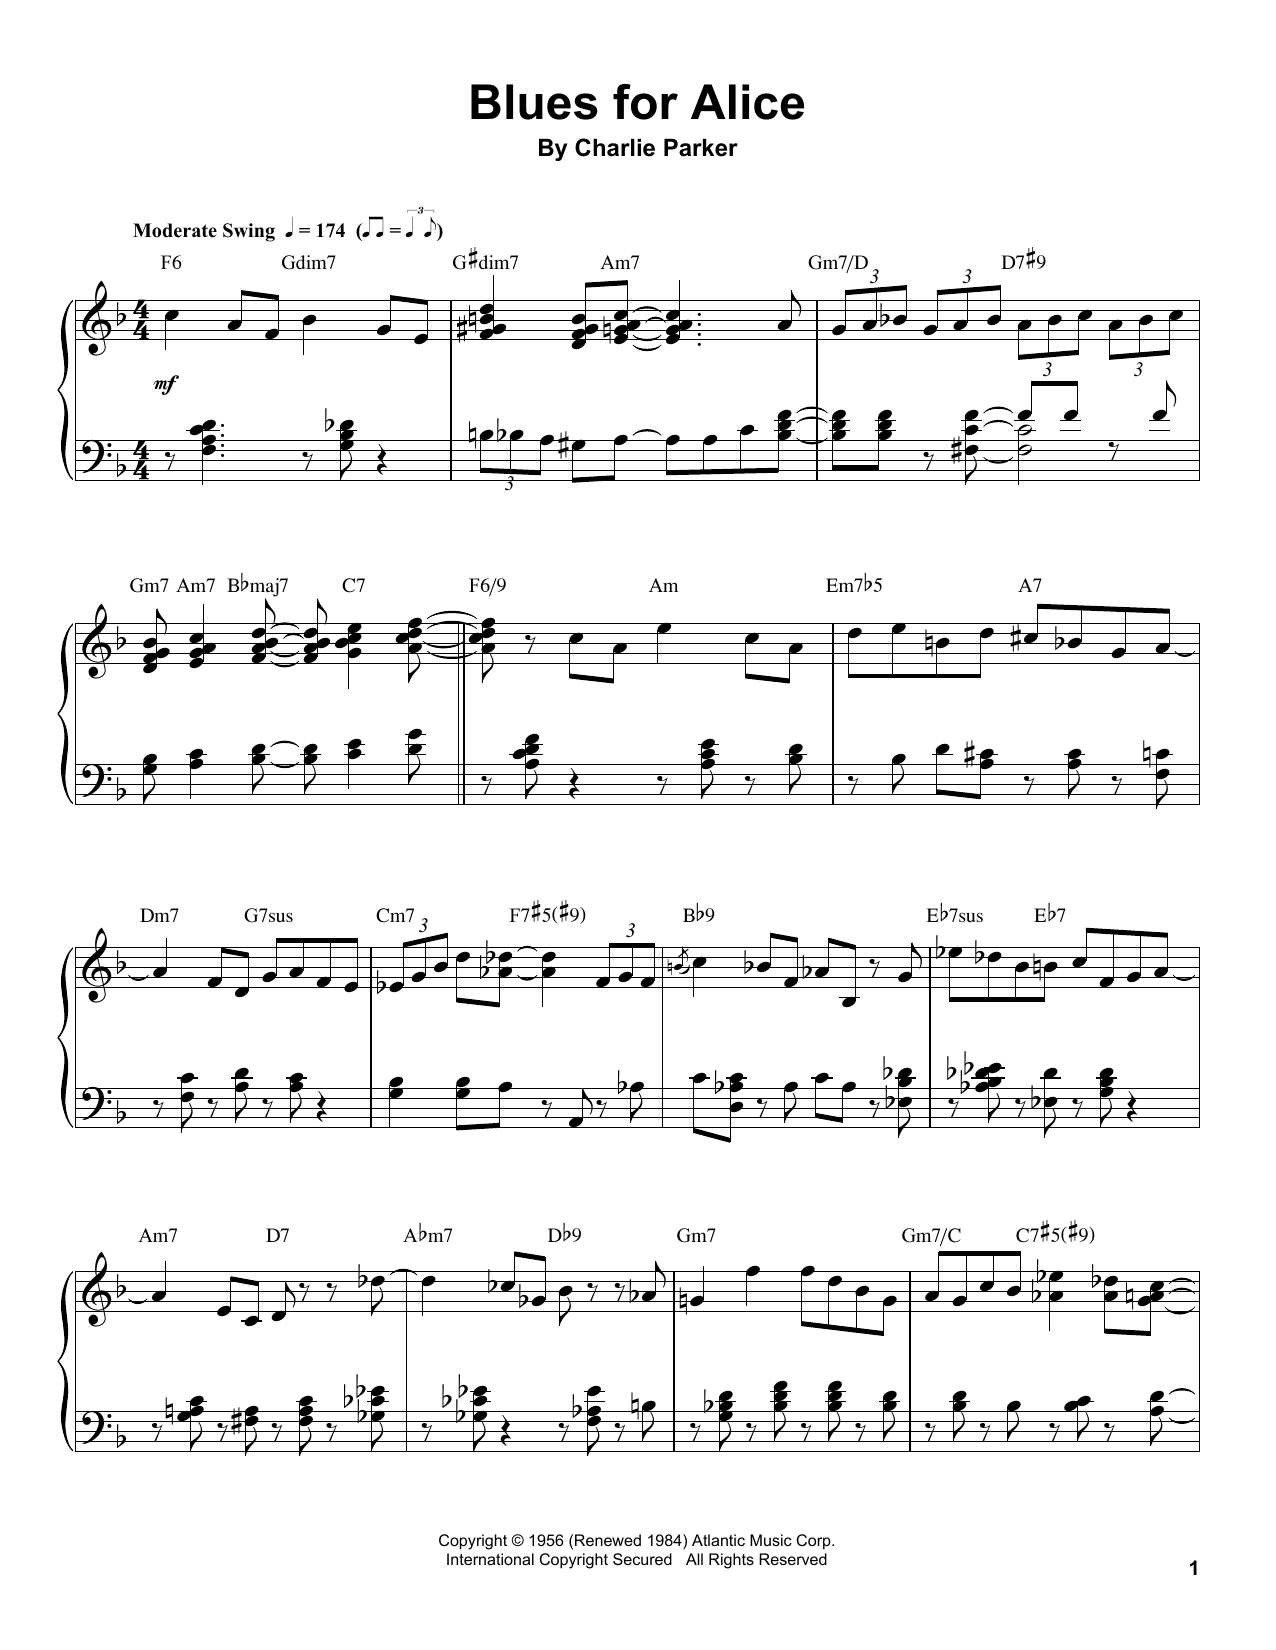 Charlie Parker Blues For Alice sheet music notes and chords. Download Printable PDF.